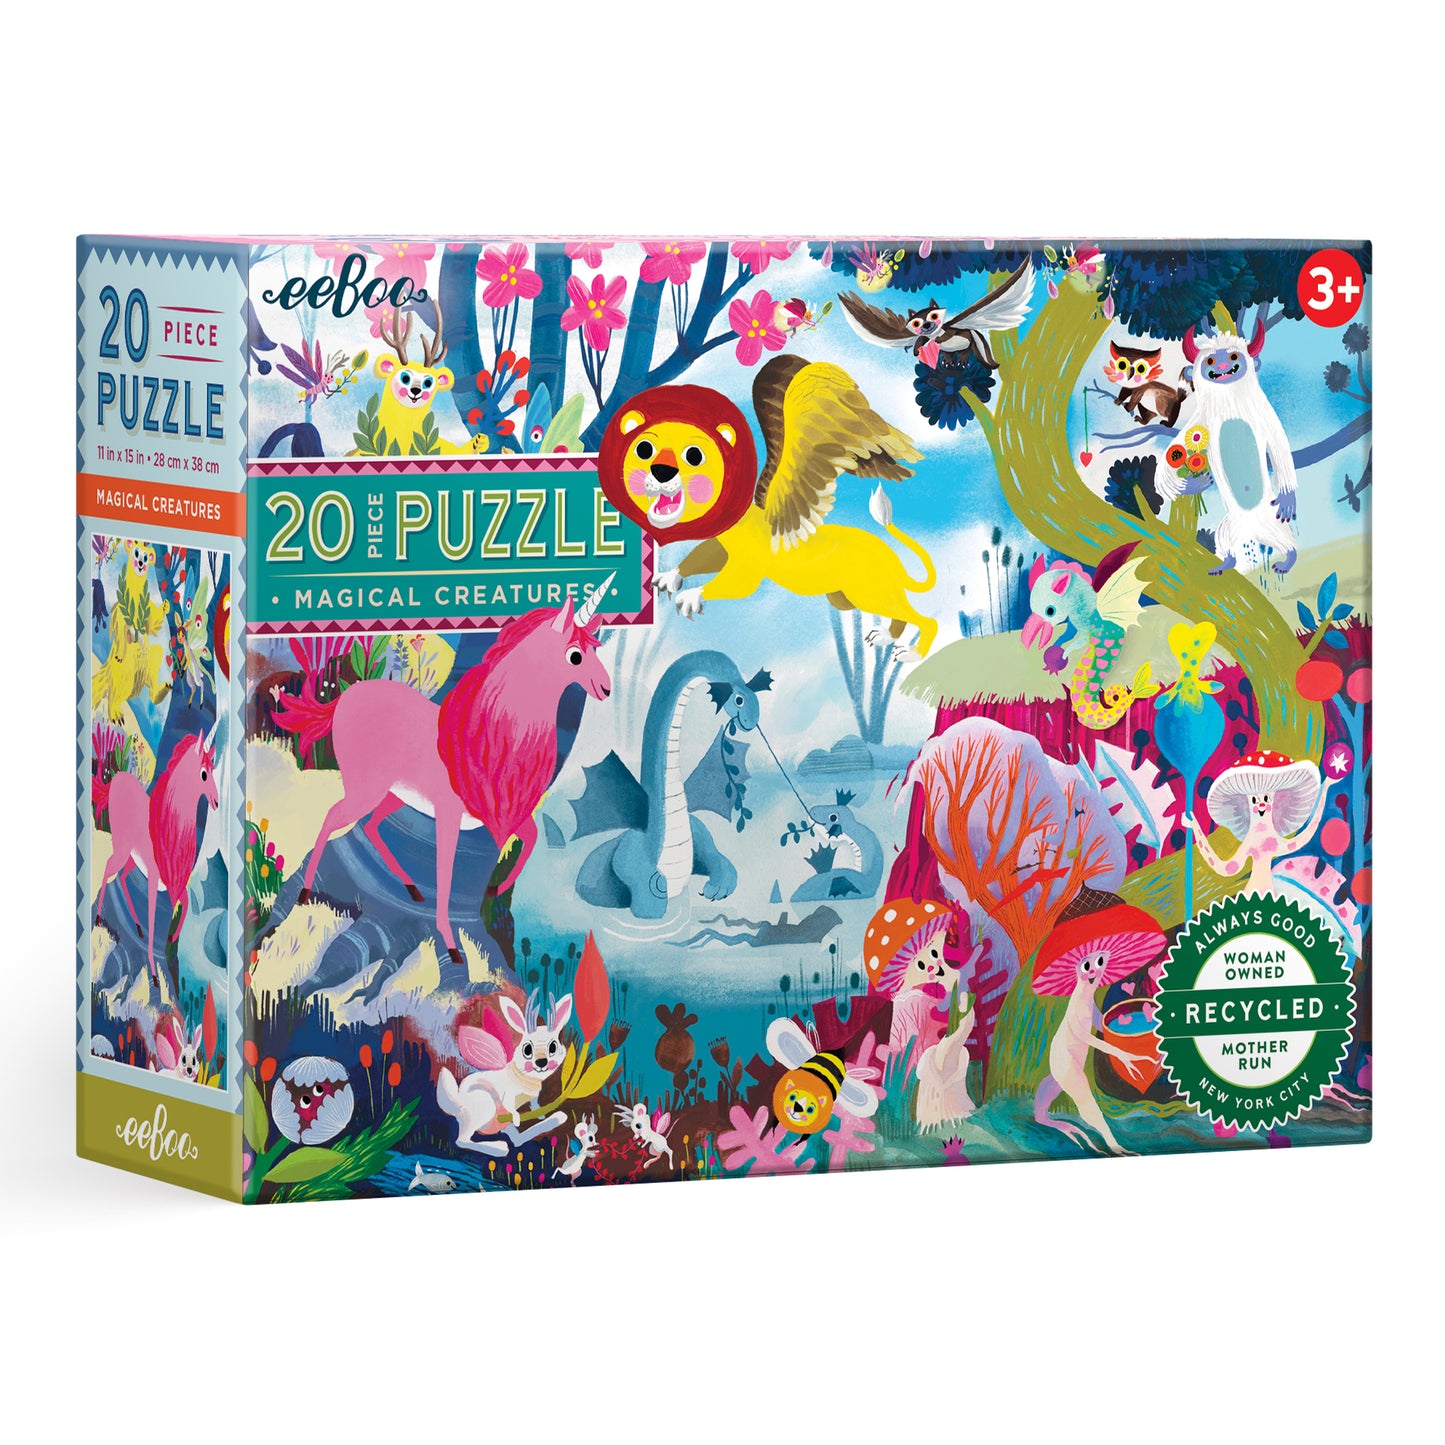 Animal ABC Alphabet 20 Piece Big Puzzle by eeBoo for Kids Ages 3+